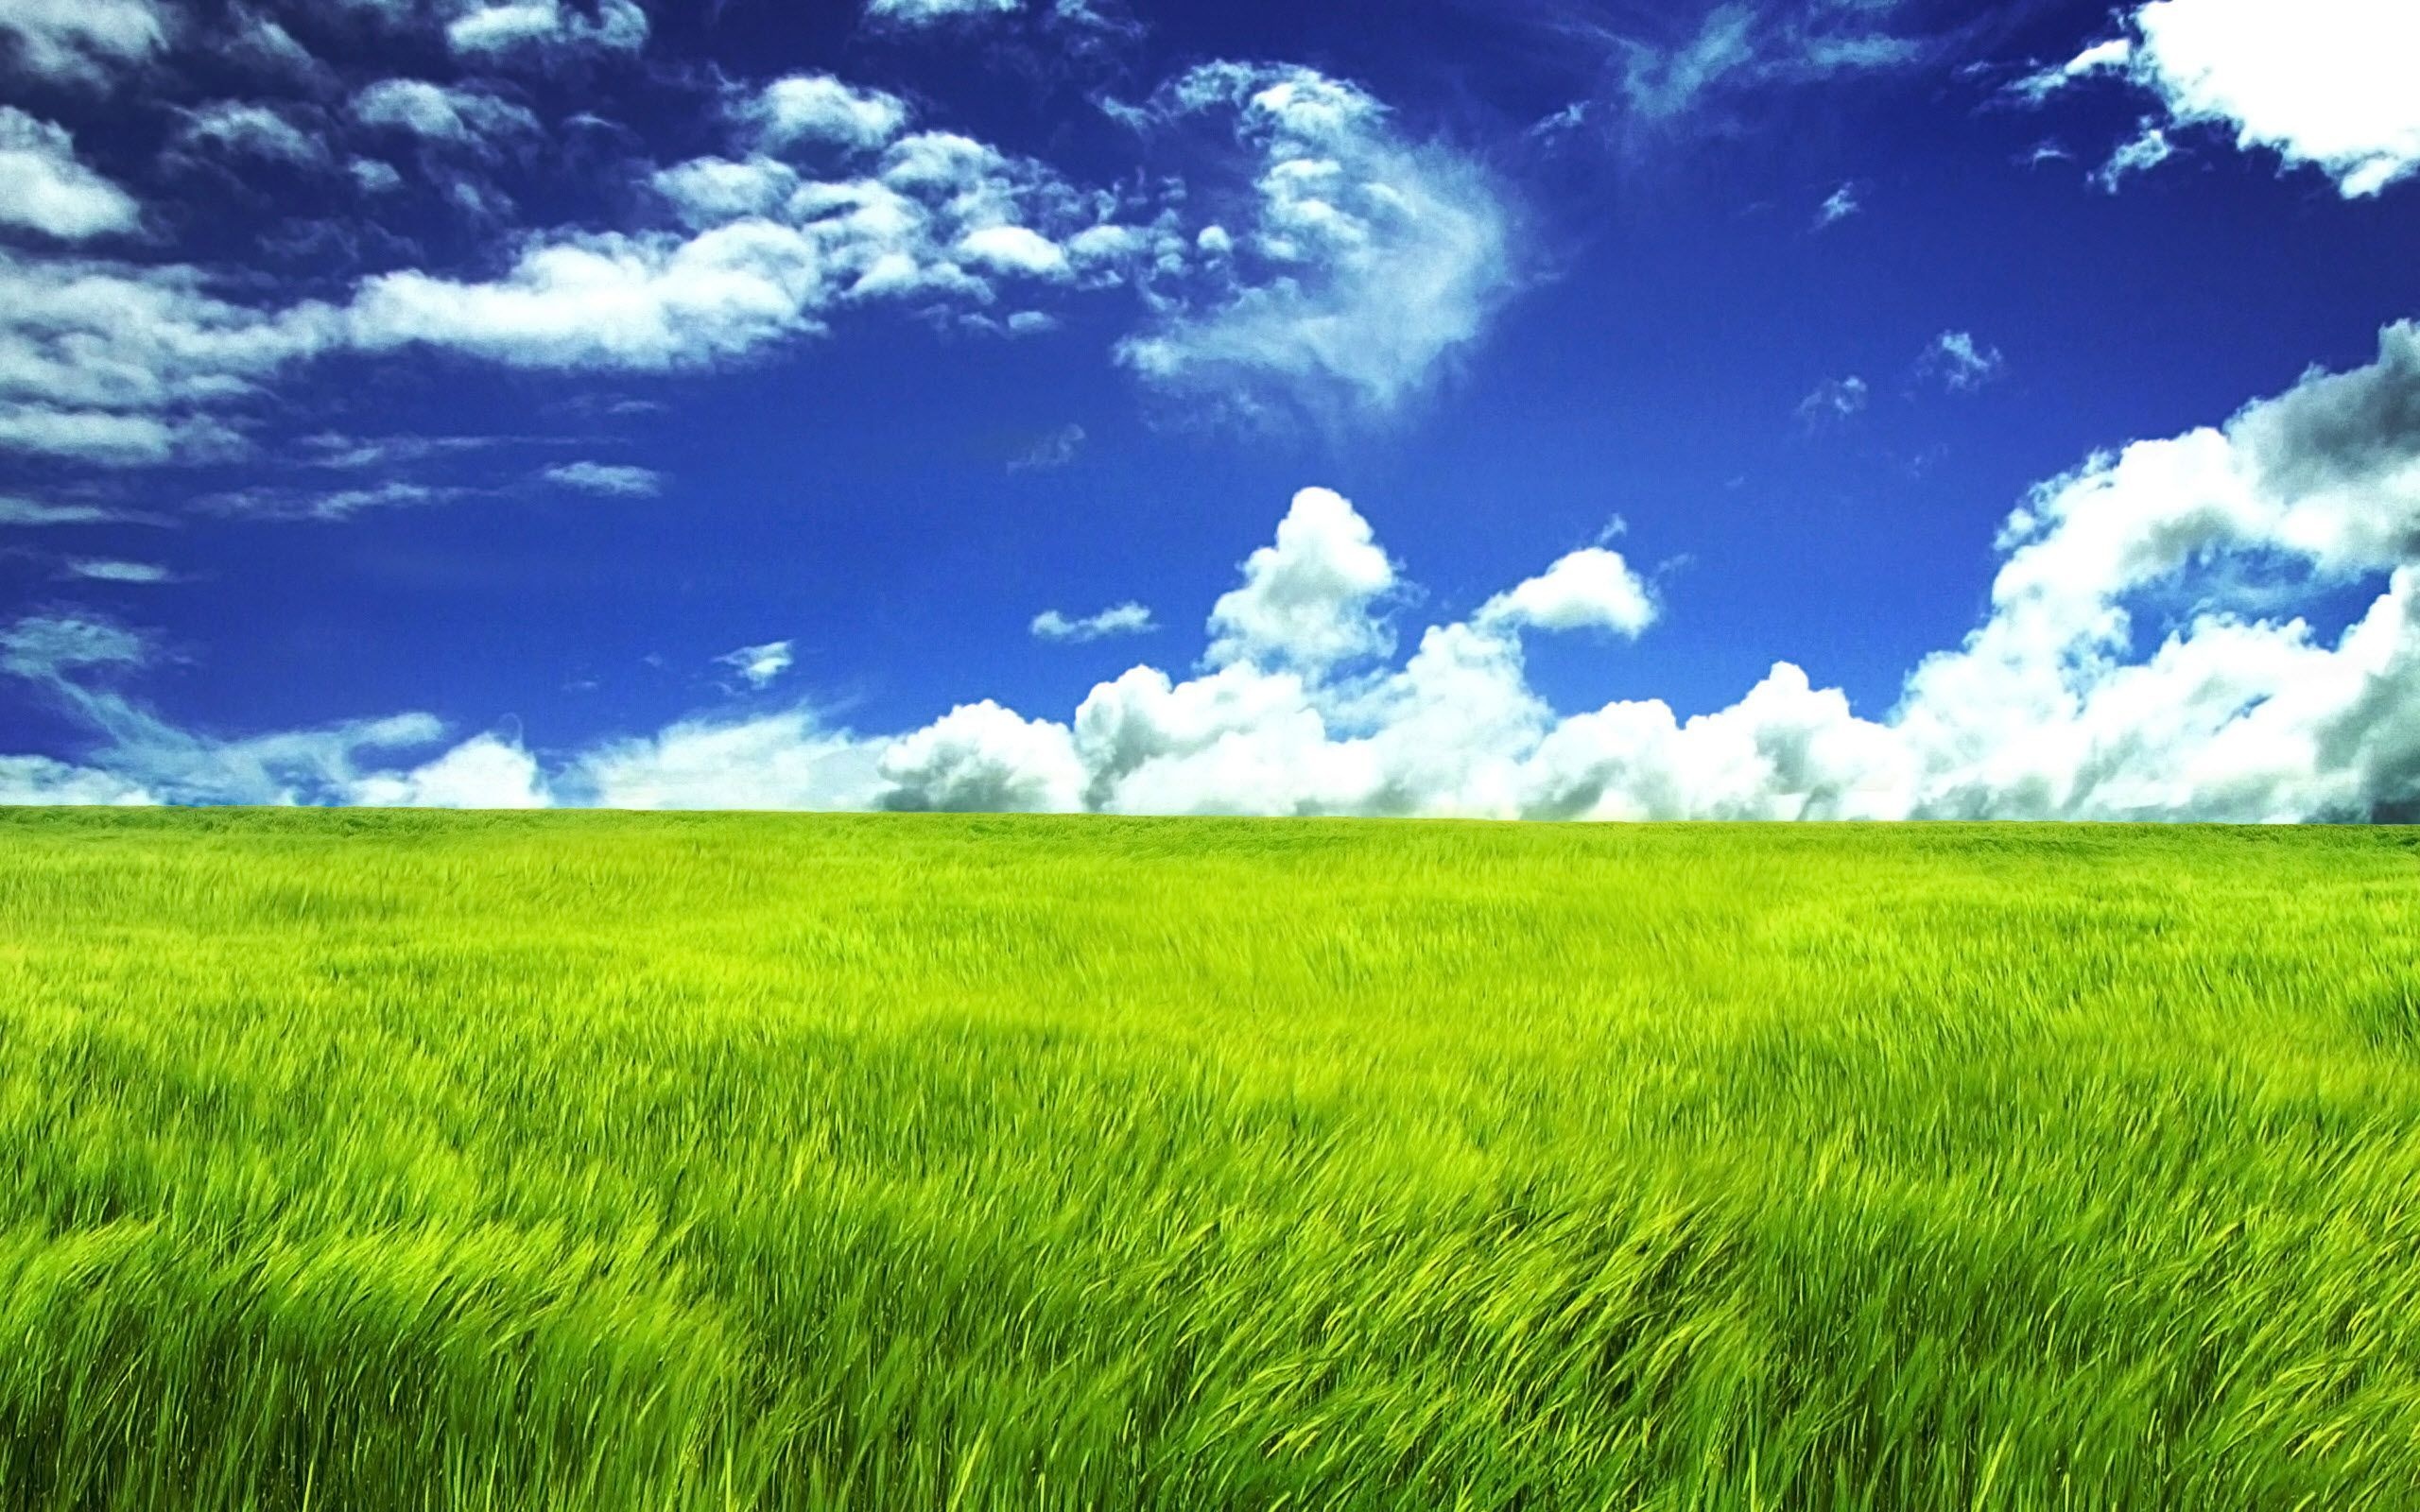 Grass and Sky: Field, Landscape, Pasture, Grazing, Outlying area, Non-metropolitan area. 2560x1600 HD Wallpaper.